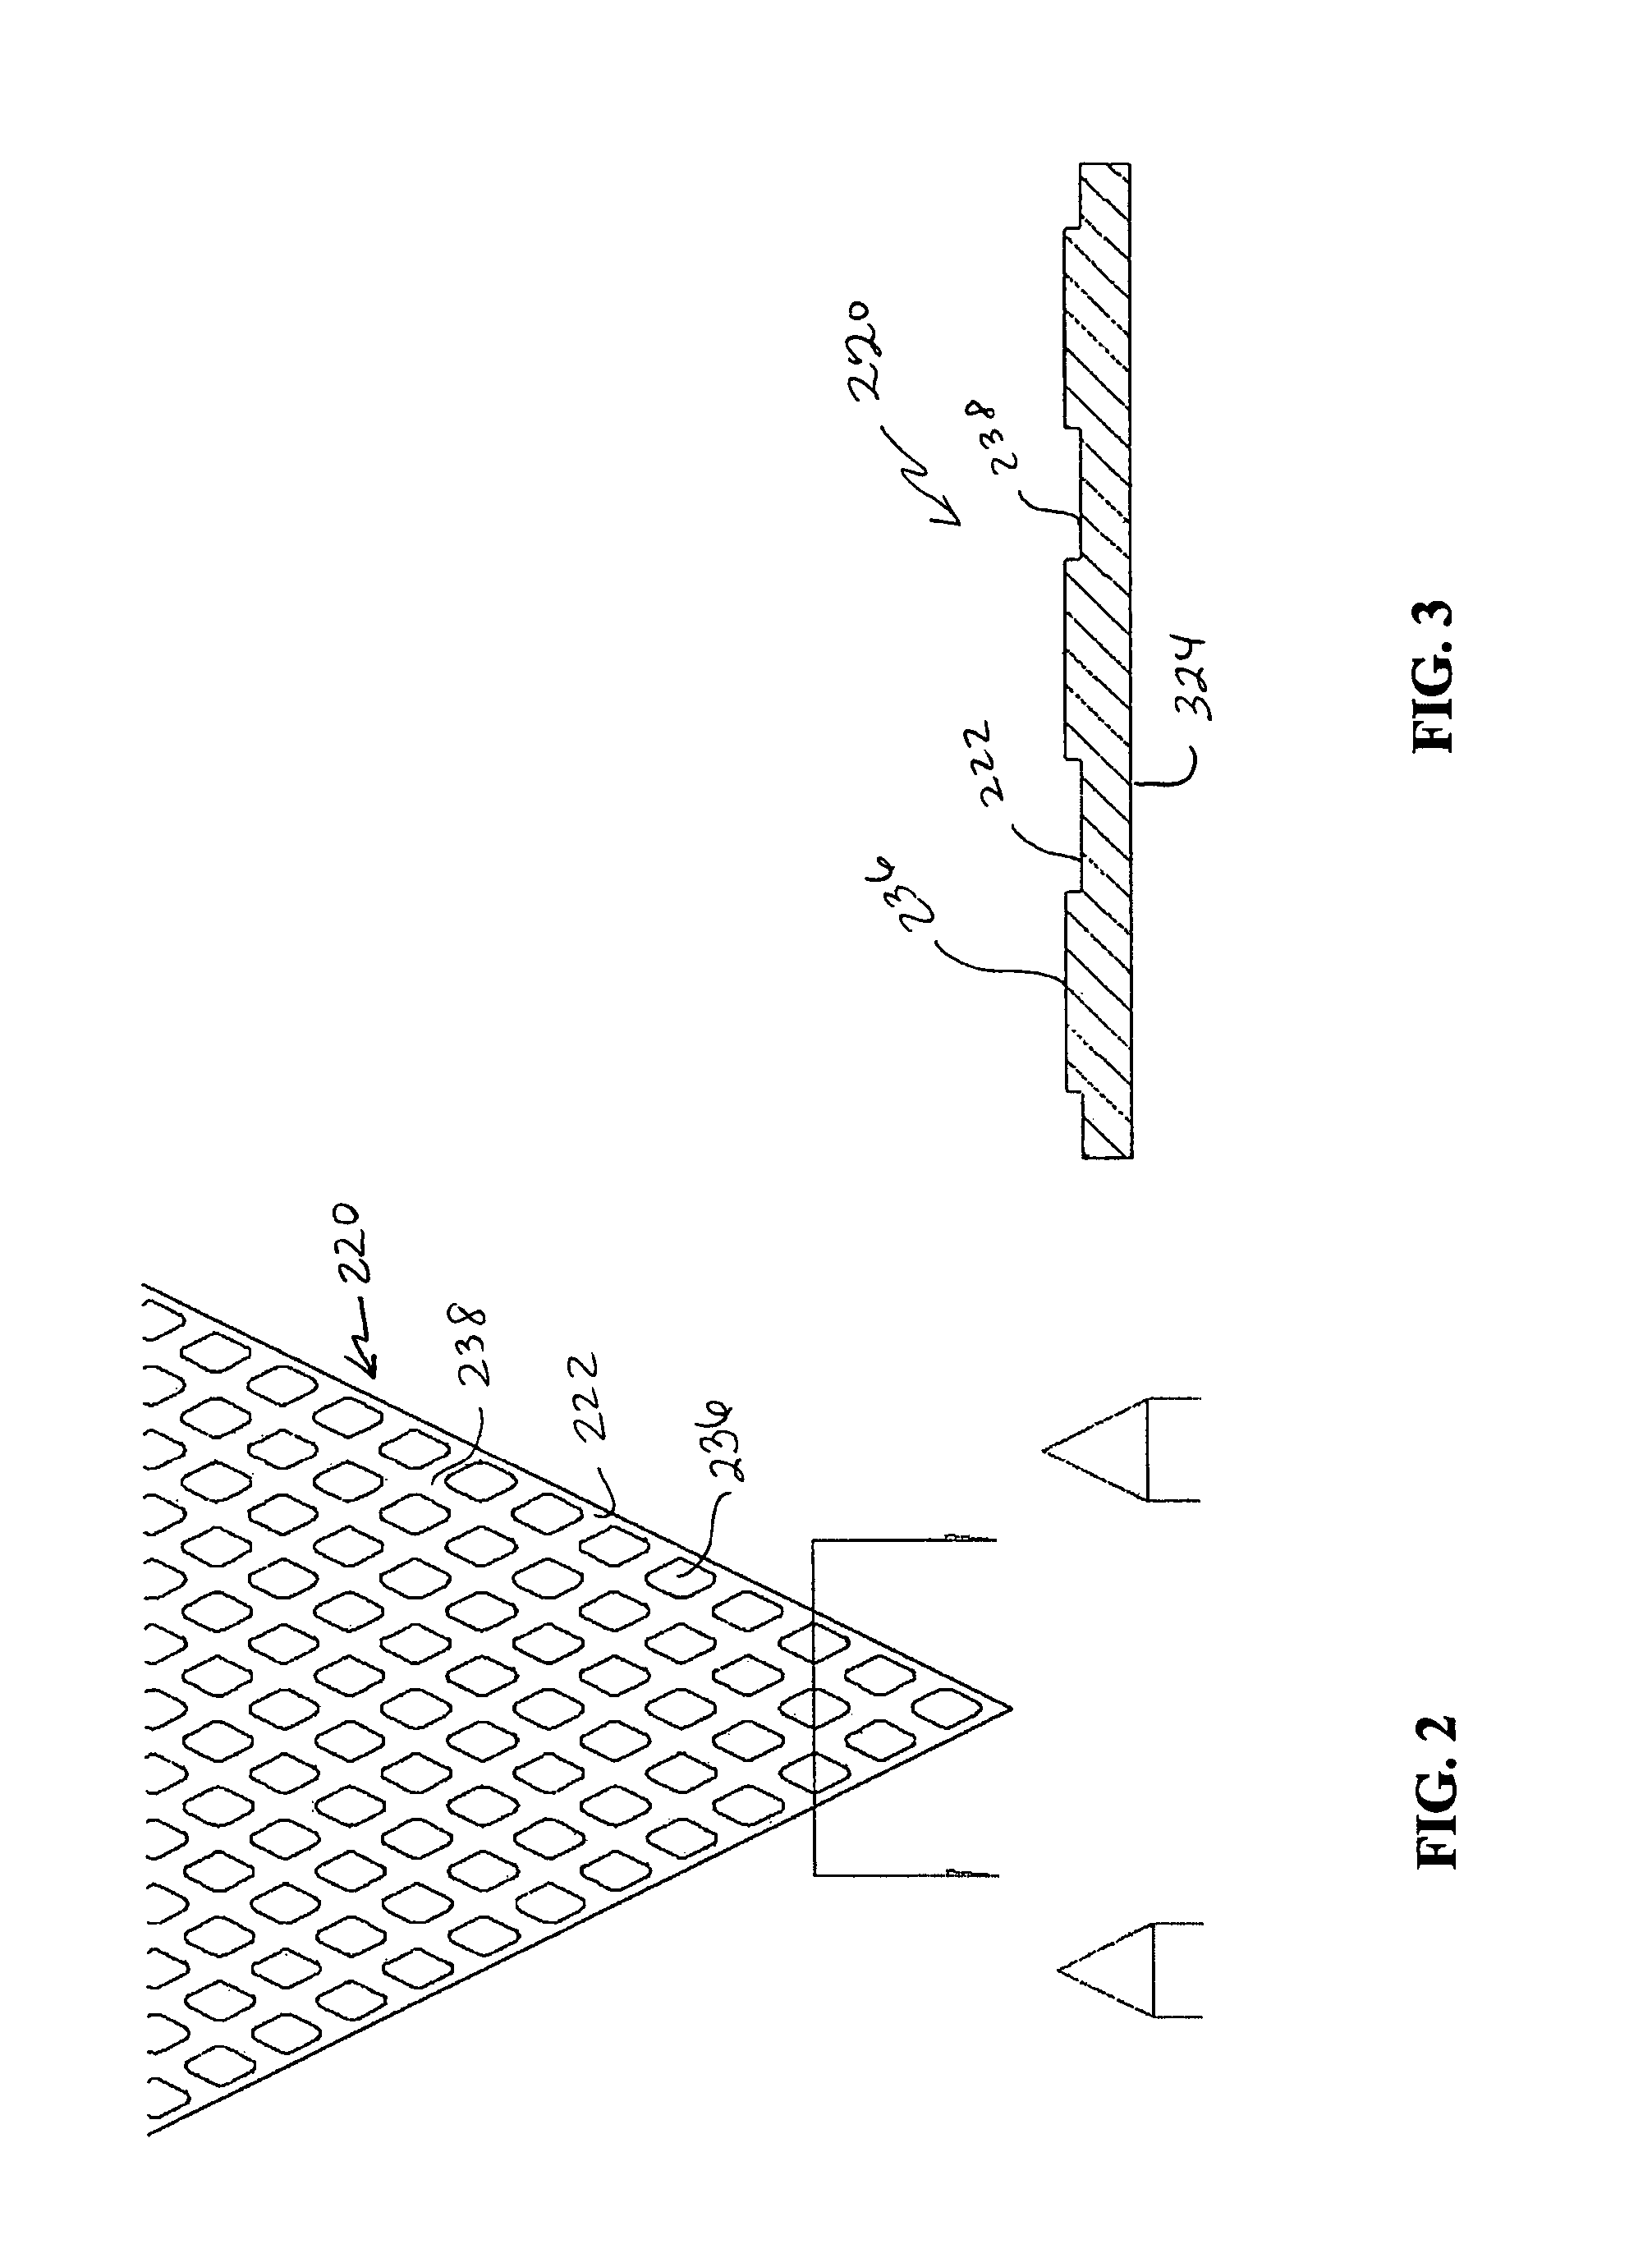 Air passage device for inflatable shoe bladders